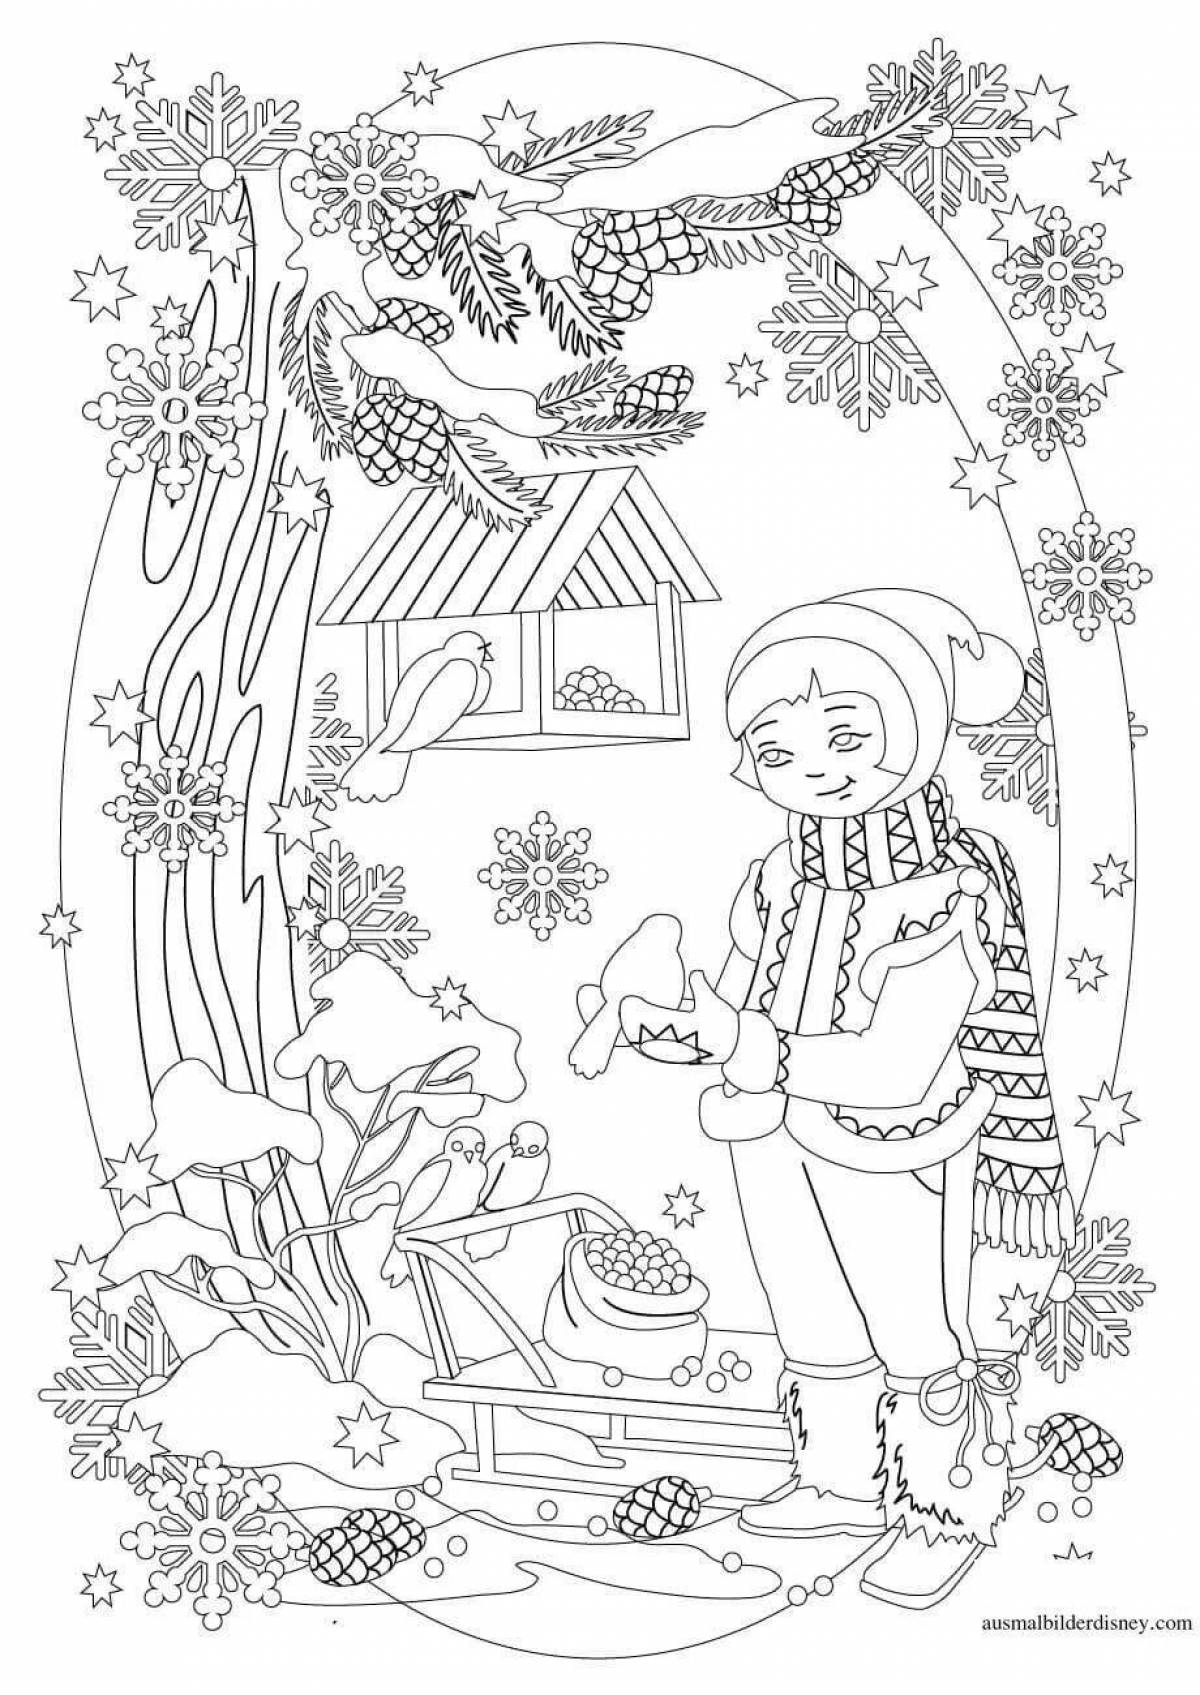 Feed the birds in winter fun coloring book for 6-7 year olds